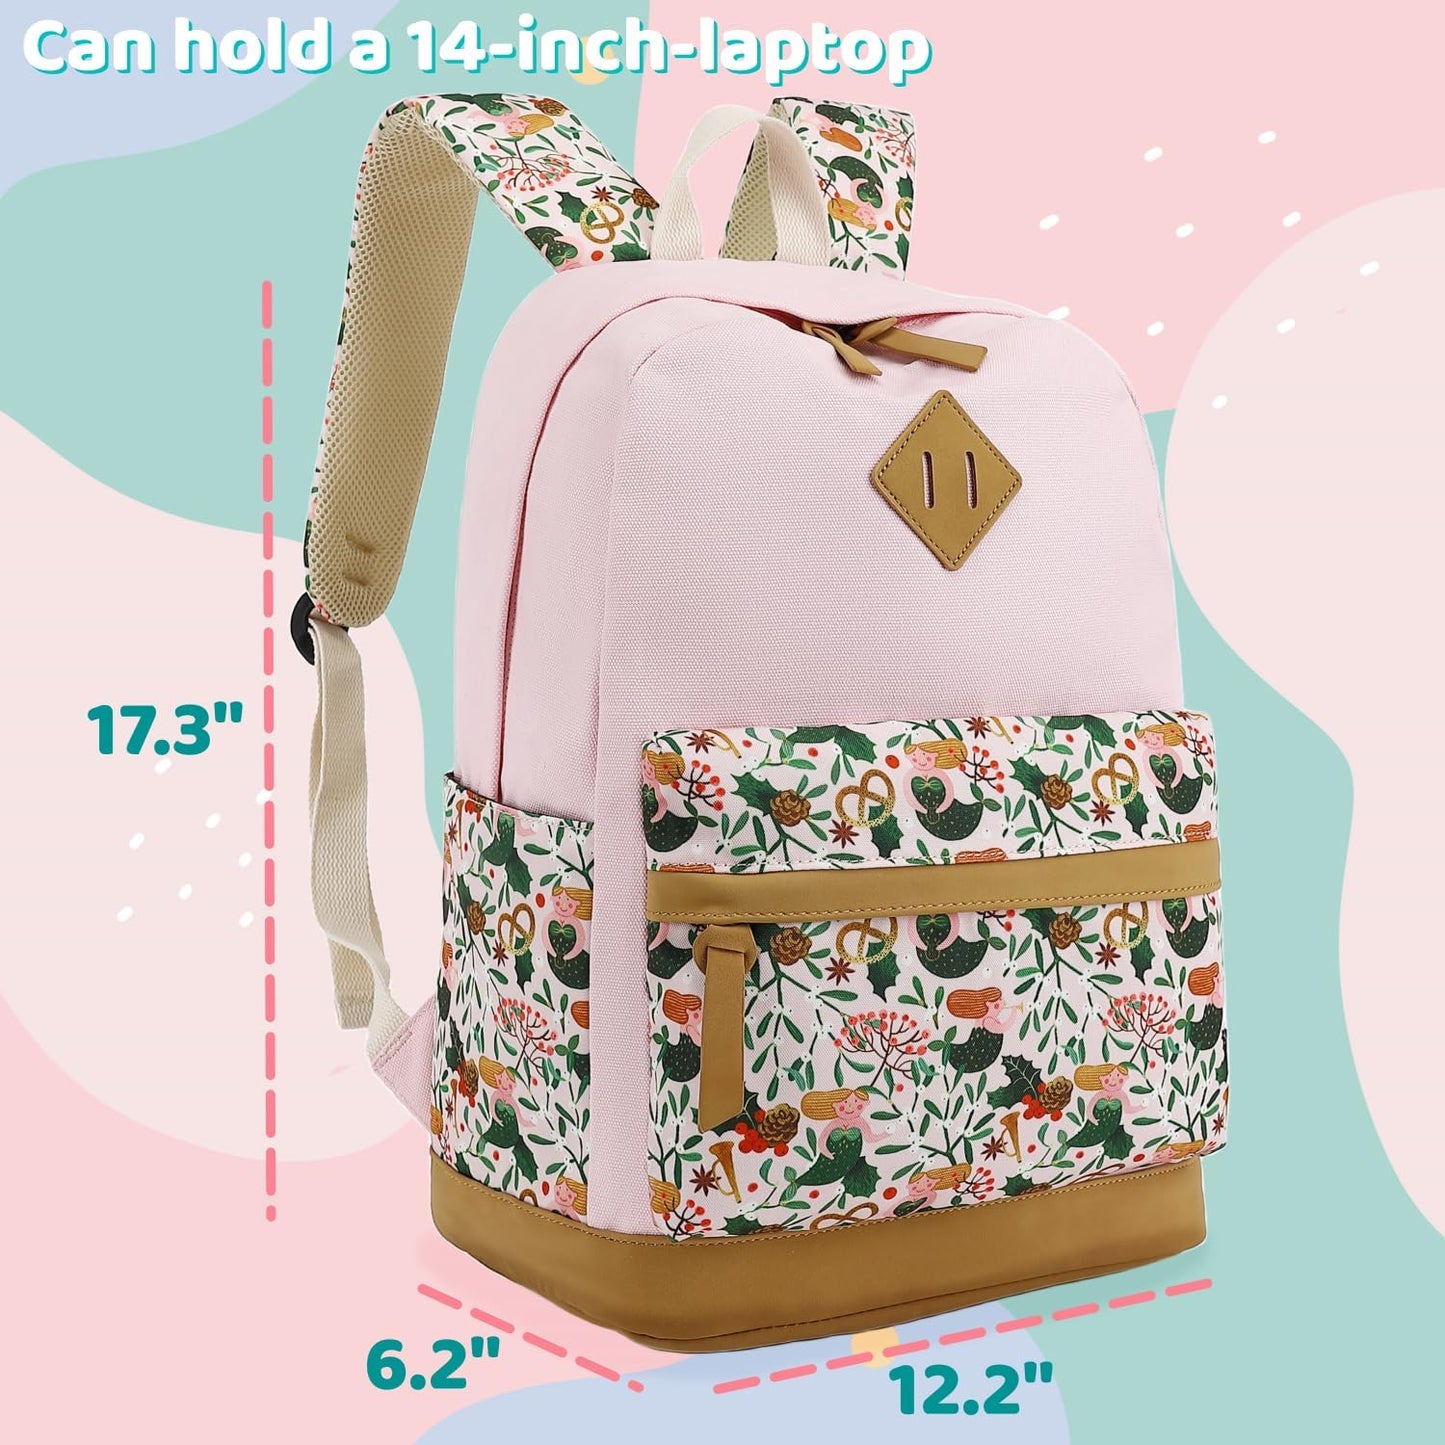 Leaper Cute Laptop Backpack Canvas Bag Daypack bag Lunch Bag Purse 3 in 1